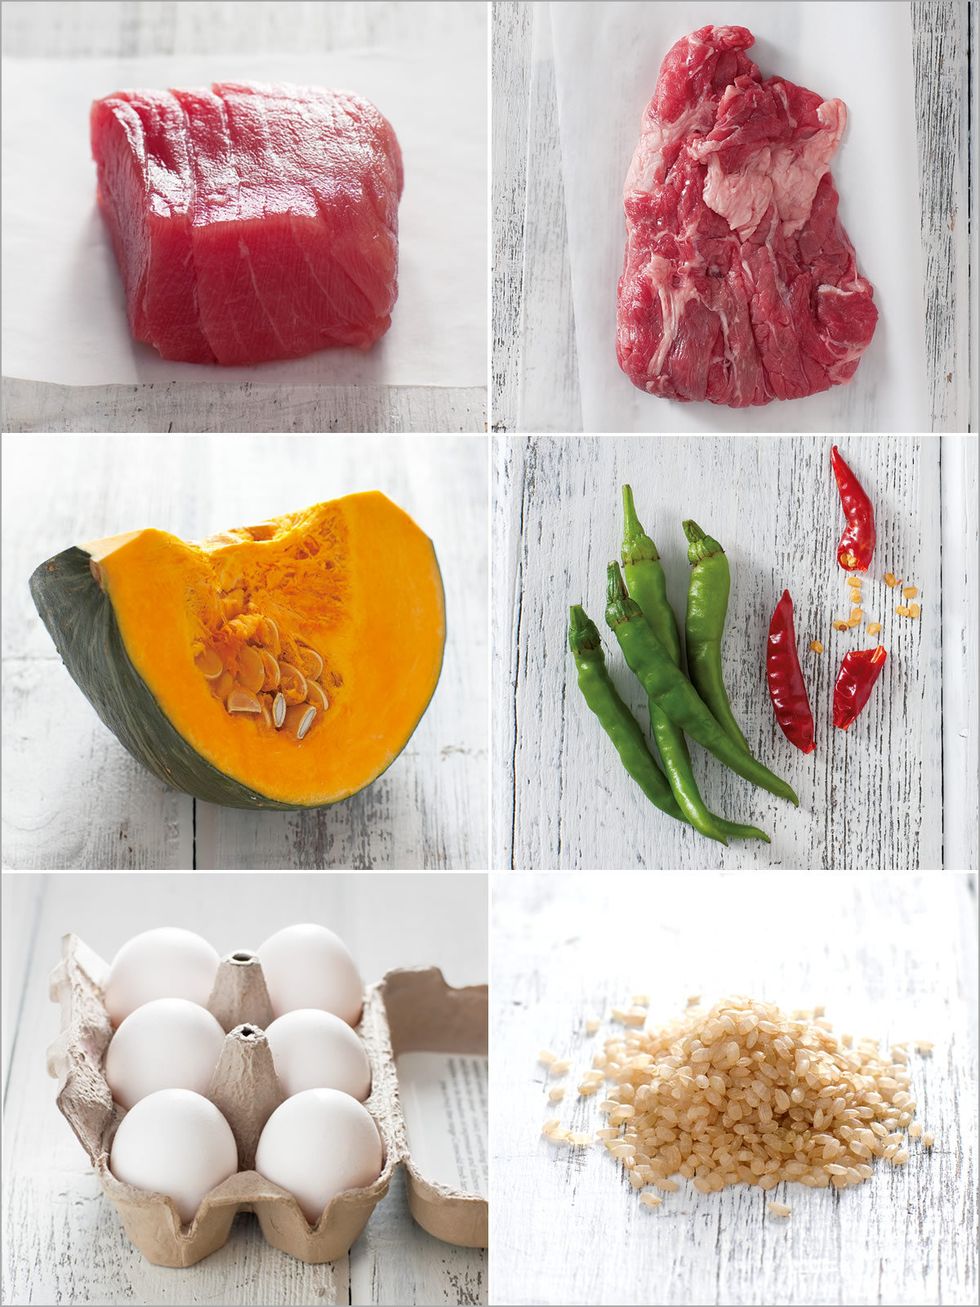 Ingredient, Egg, Egg, Red meat, Ostrich meat, Animal product, Staple food, Natural material, Powder, Flesh, 